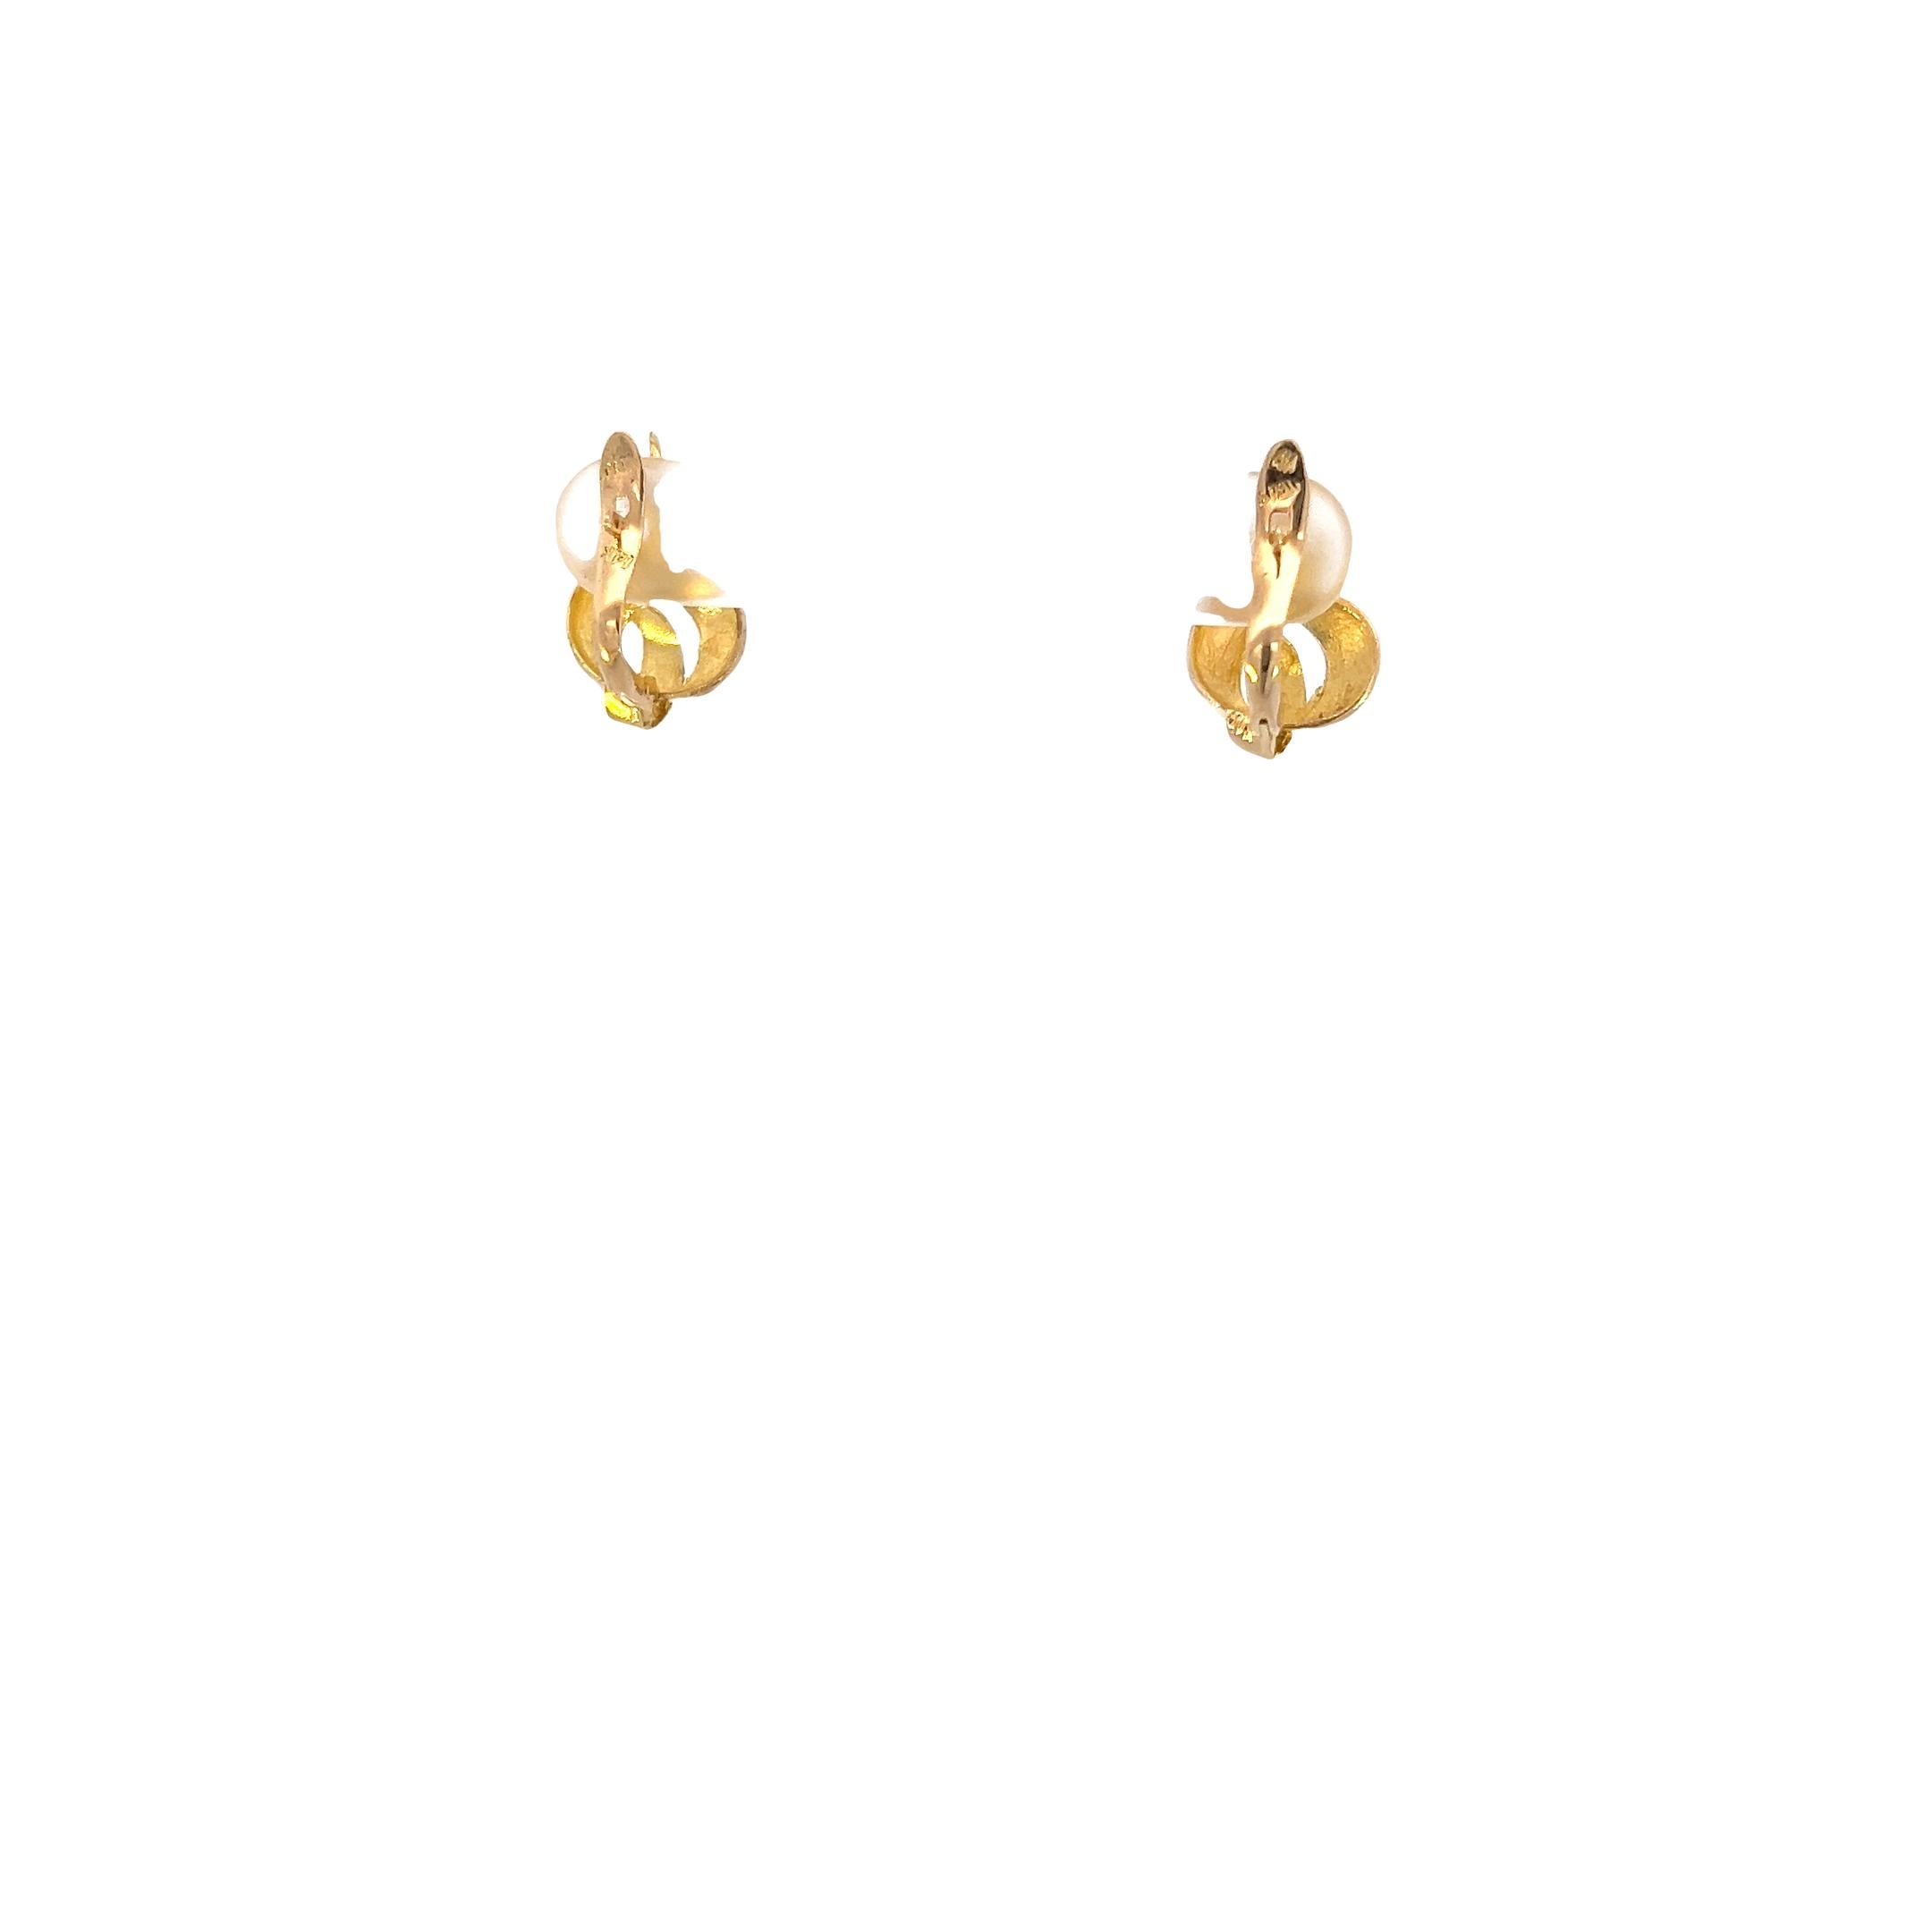 A pair of 14k yellow gold earrings weighing 2.25 grams is a description of a specific piece of jewelry. Here's a breakdown of the details:

Material: The earrings are made of 14-karat yellow gold. The 